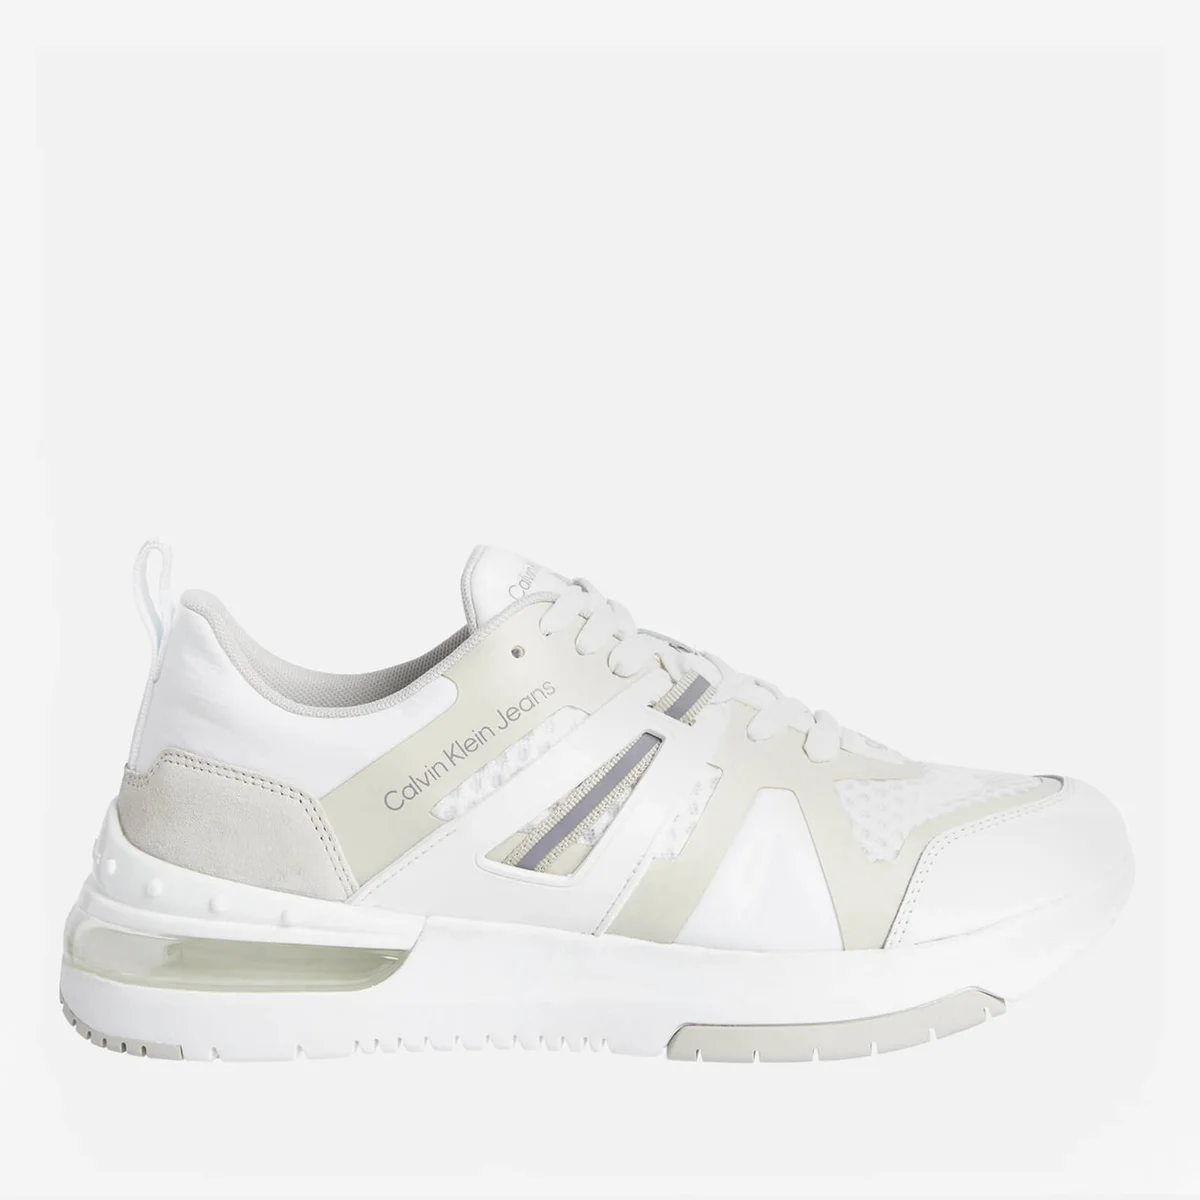 Calvin Klein Jeans Men's New Sporty Comfair 2 Running Style Trainers - Bright White Image 1